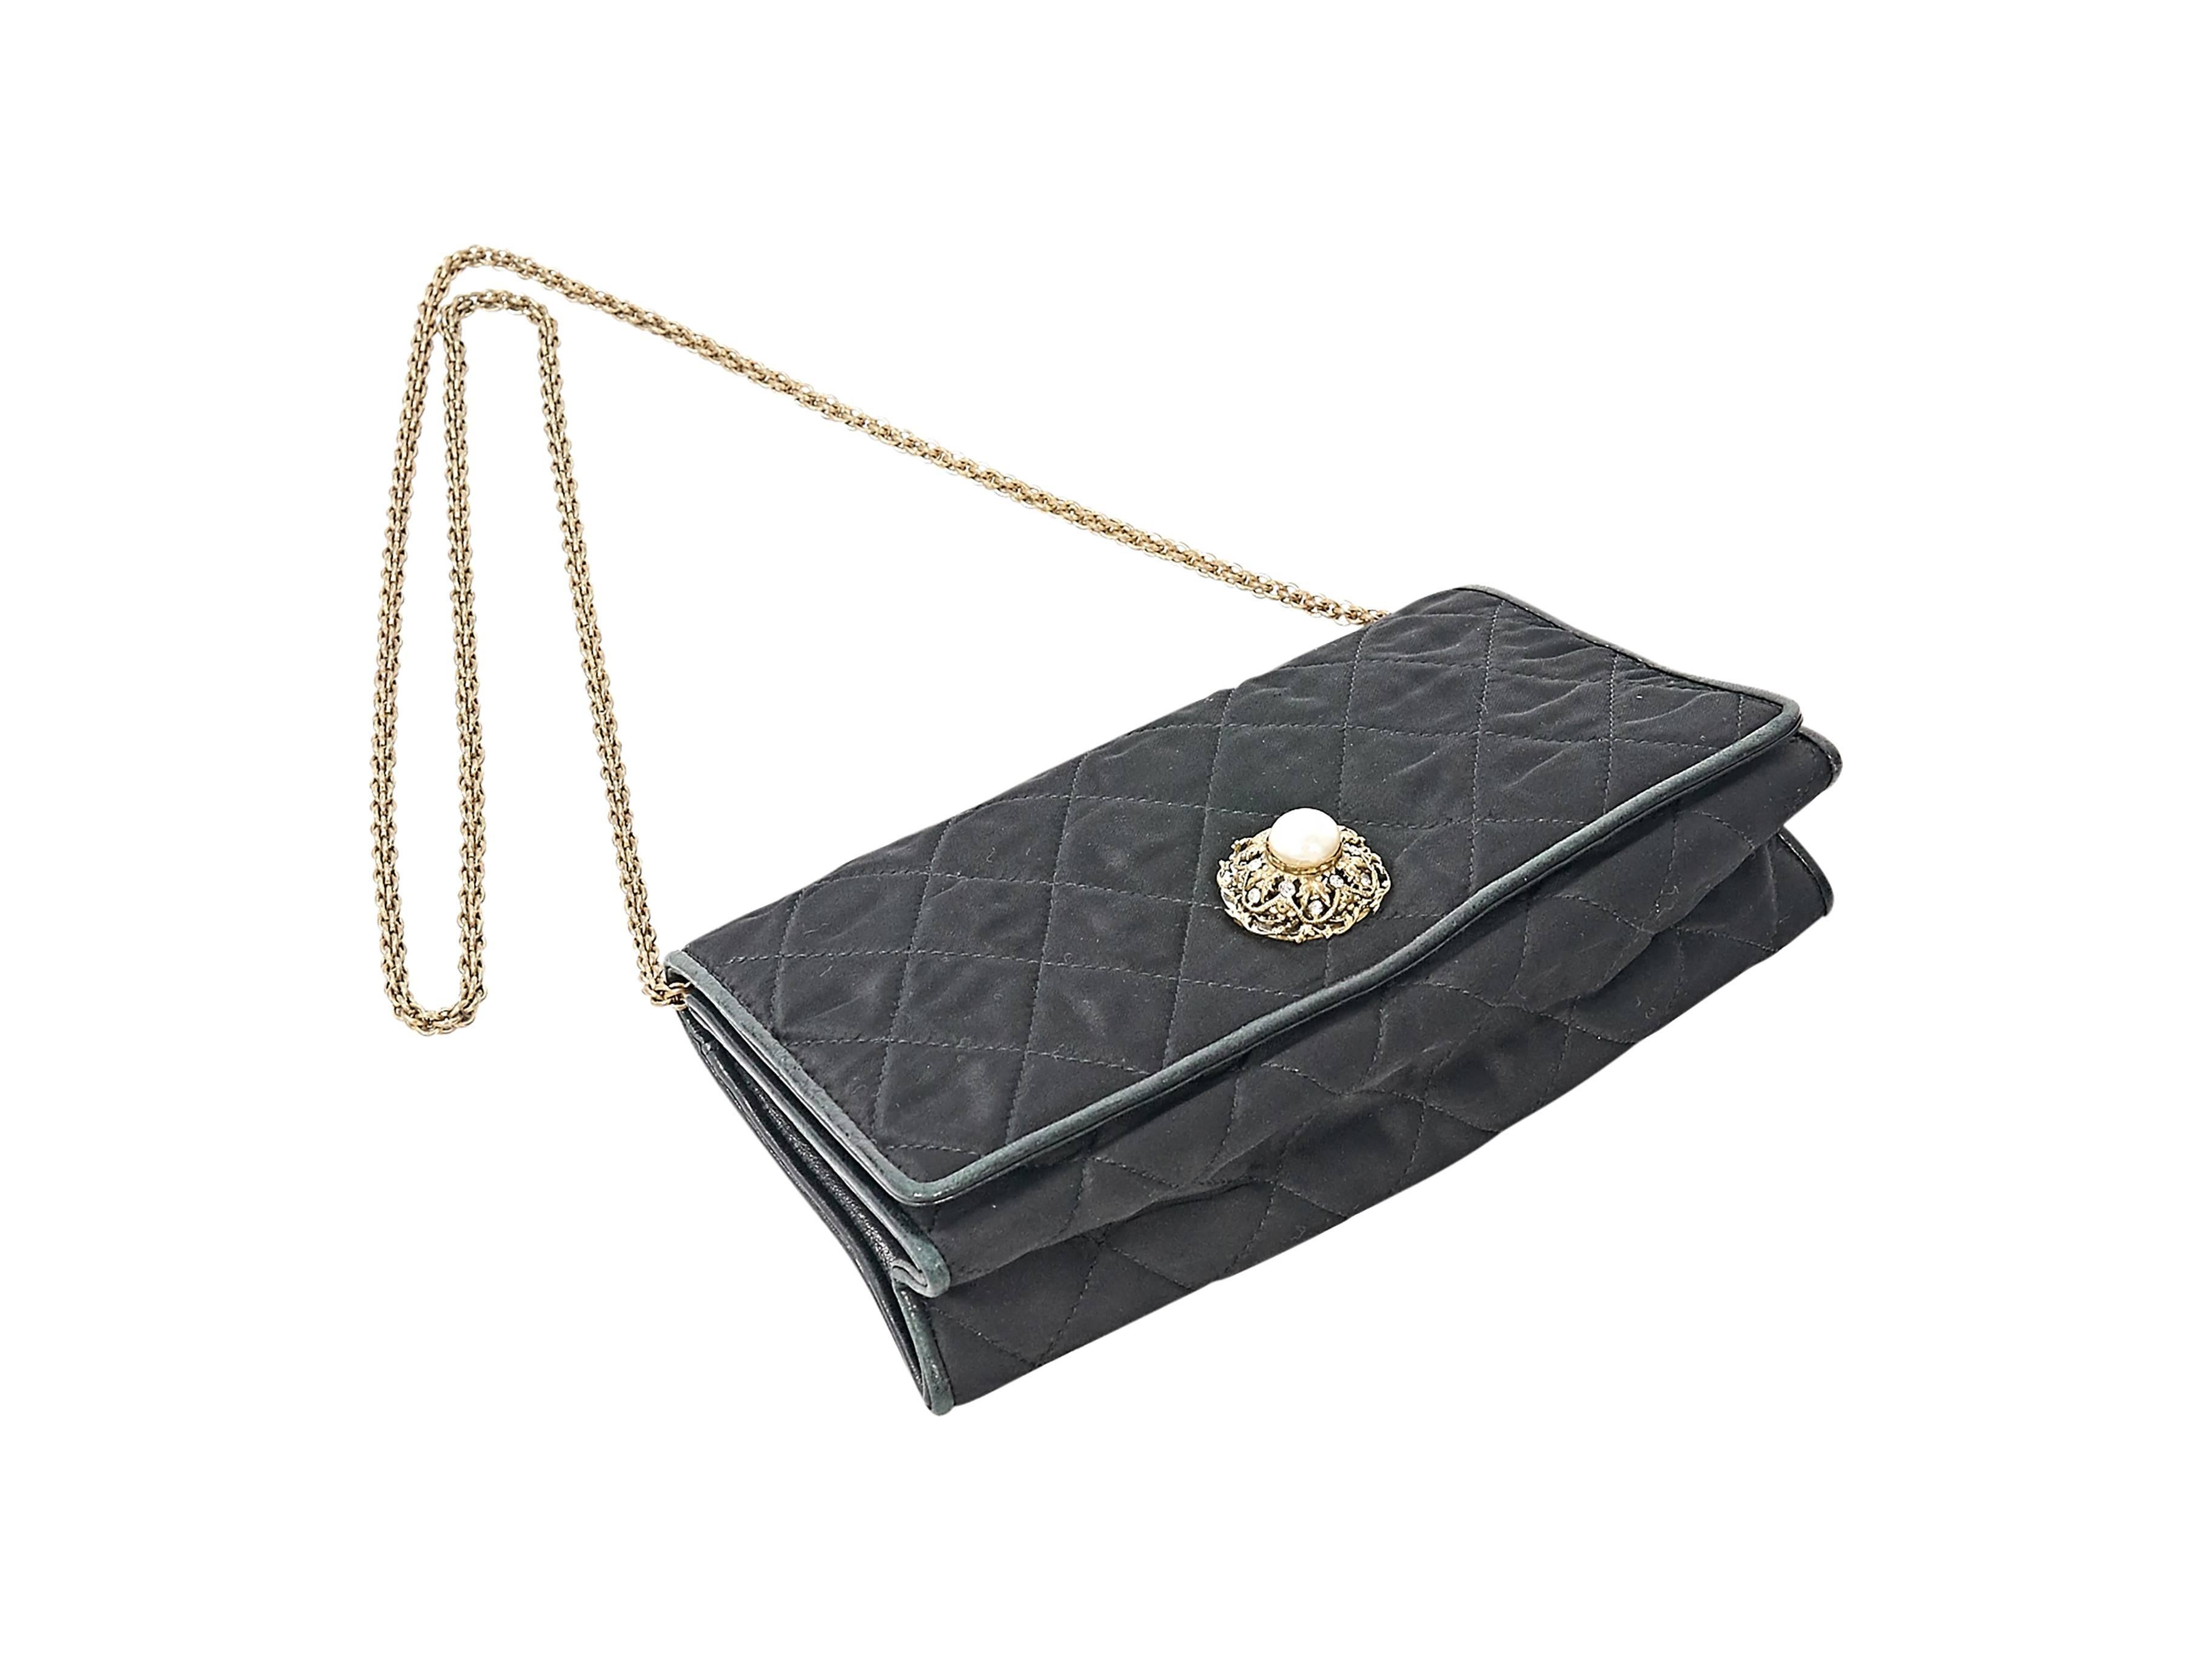 Product details:  Vintage black quilted flap bag by Chanel.  Accented with a pearl detail.  Chain crossbody strap.  Concealed magnetic snap closure.  Lined interior with inner zip pocket.  Goldtone hardware.  8.75"L x 4.5"H x 2.5"D. 